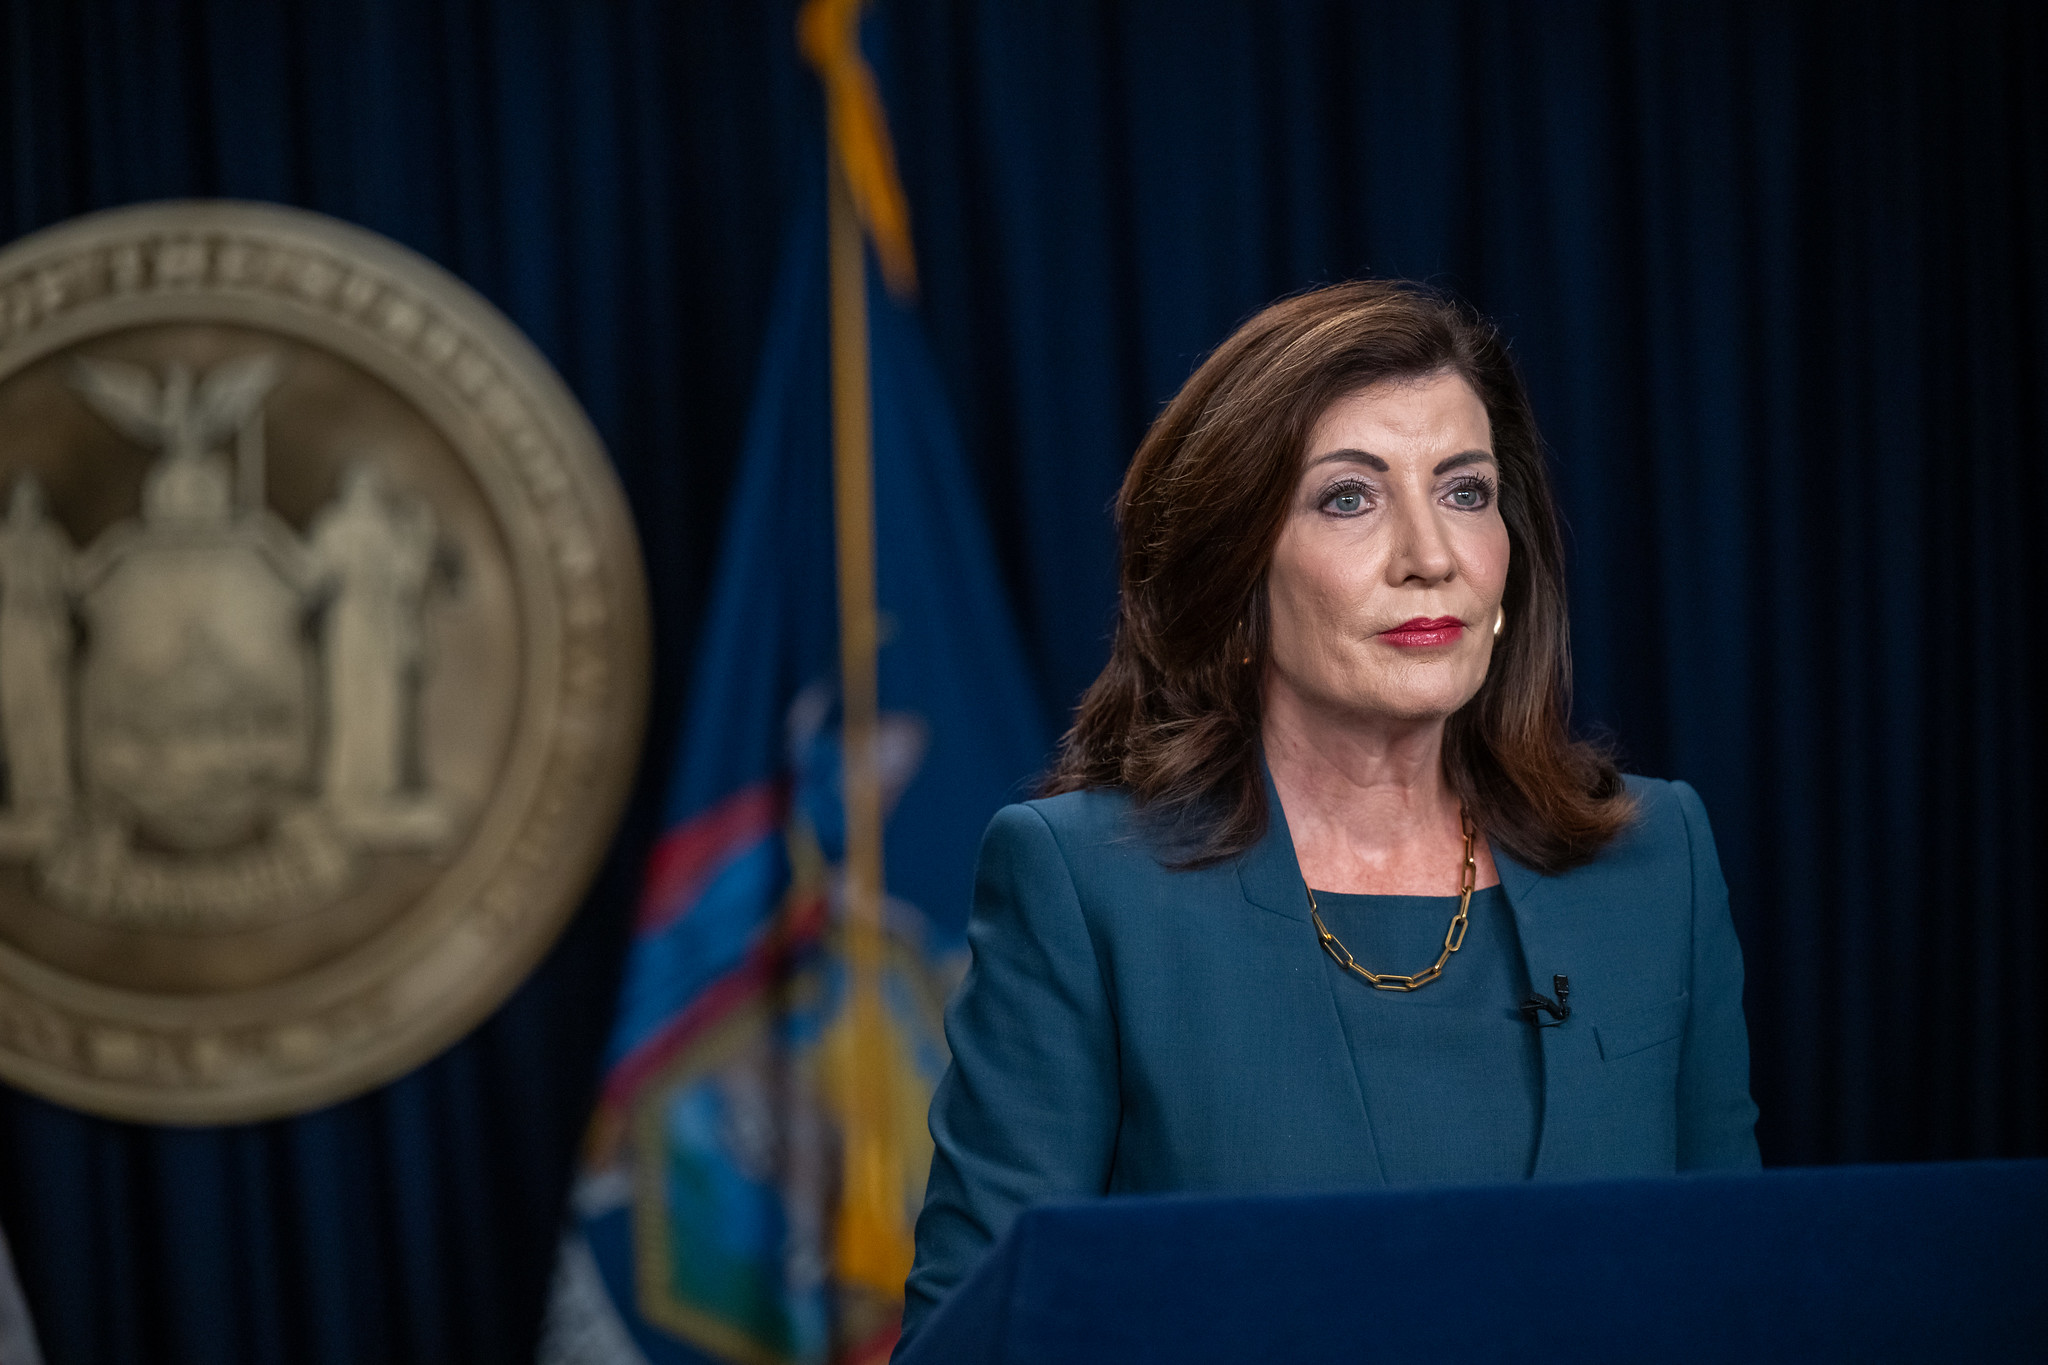 governor-hochul-announces-millionaire-investment-in-protection-against-hate-crimes-in-ny